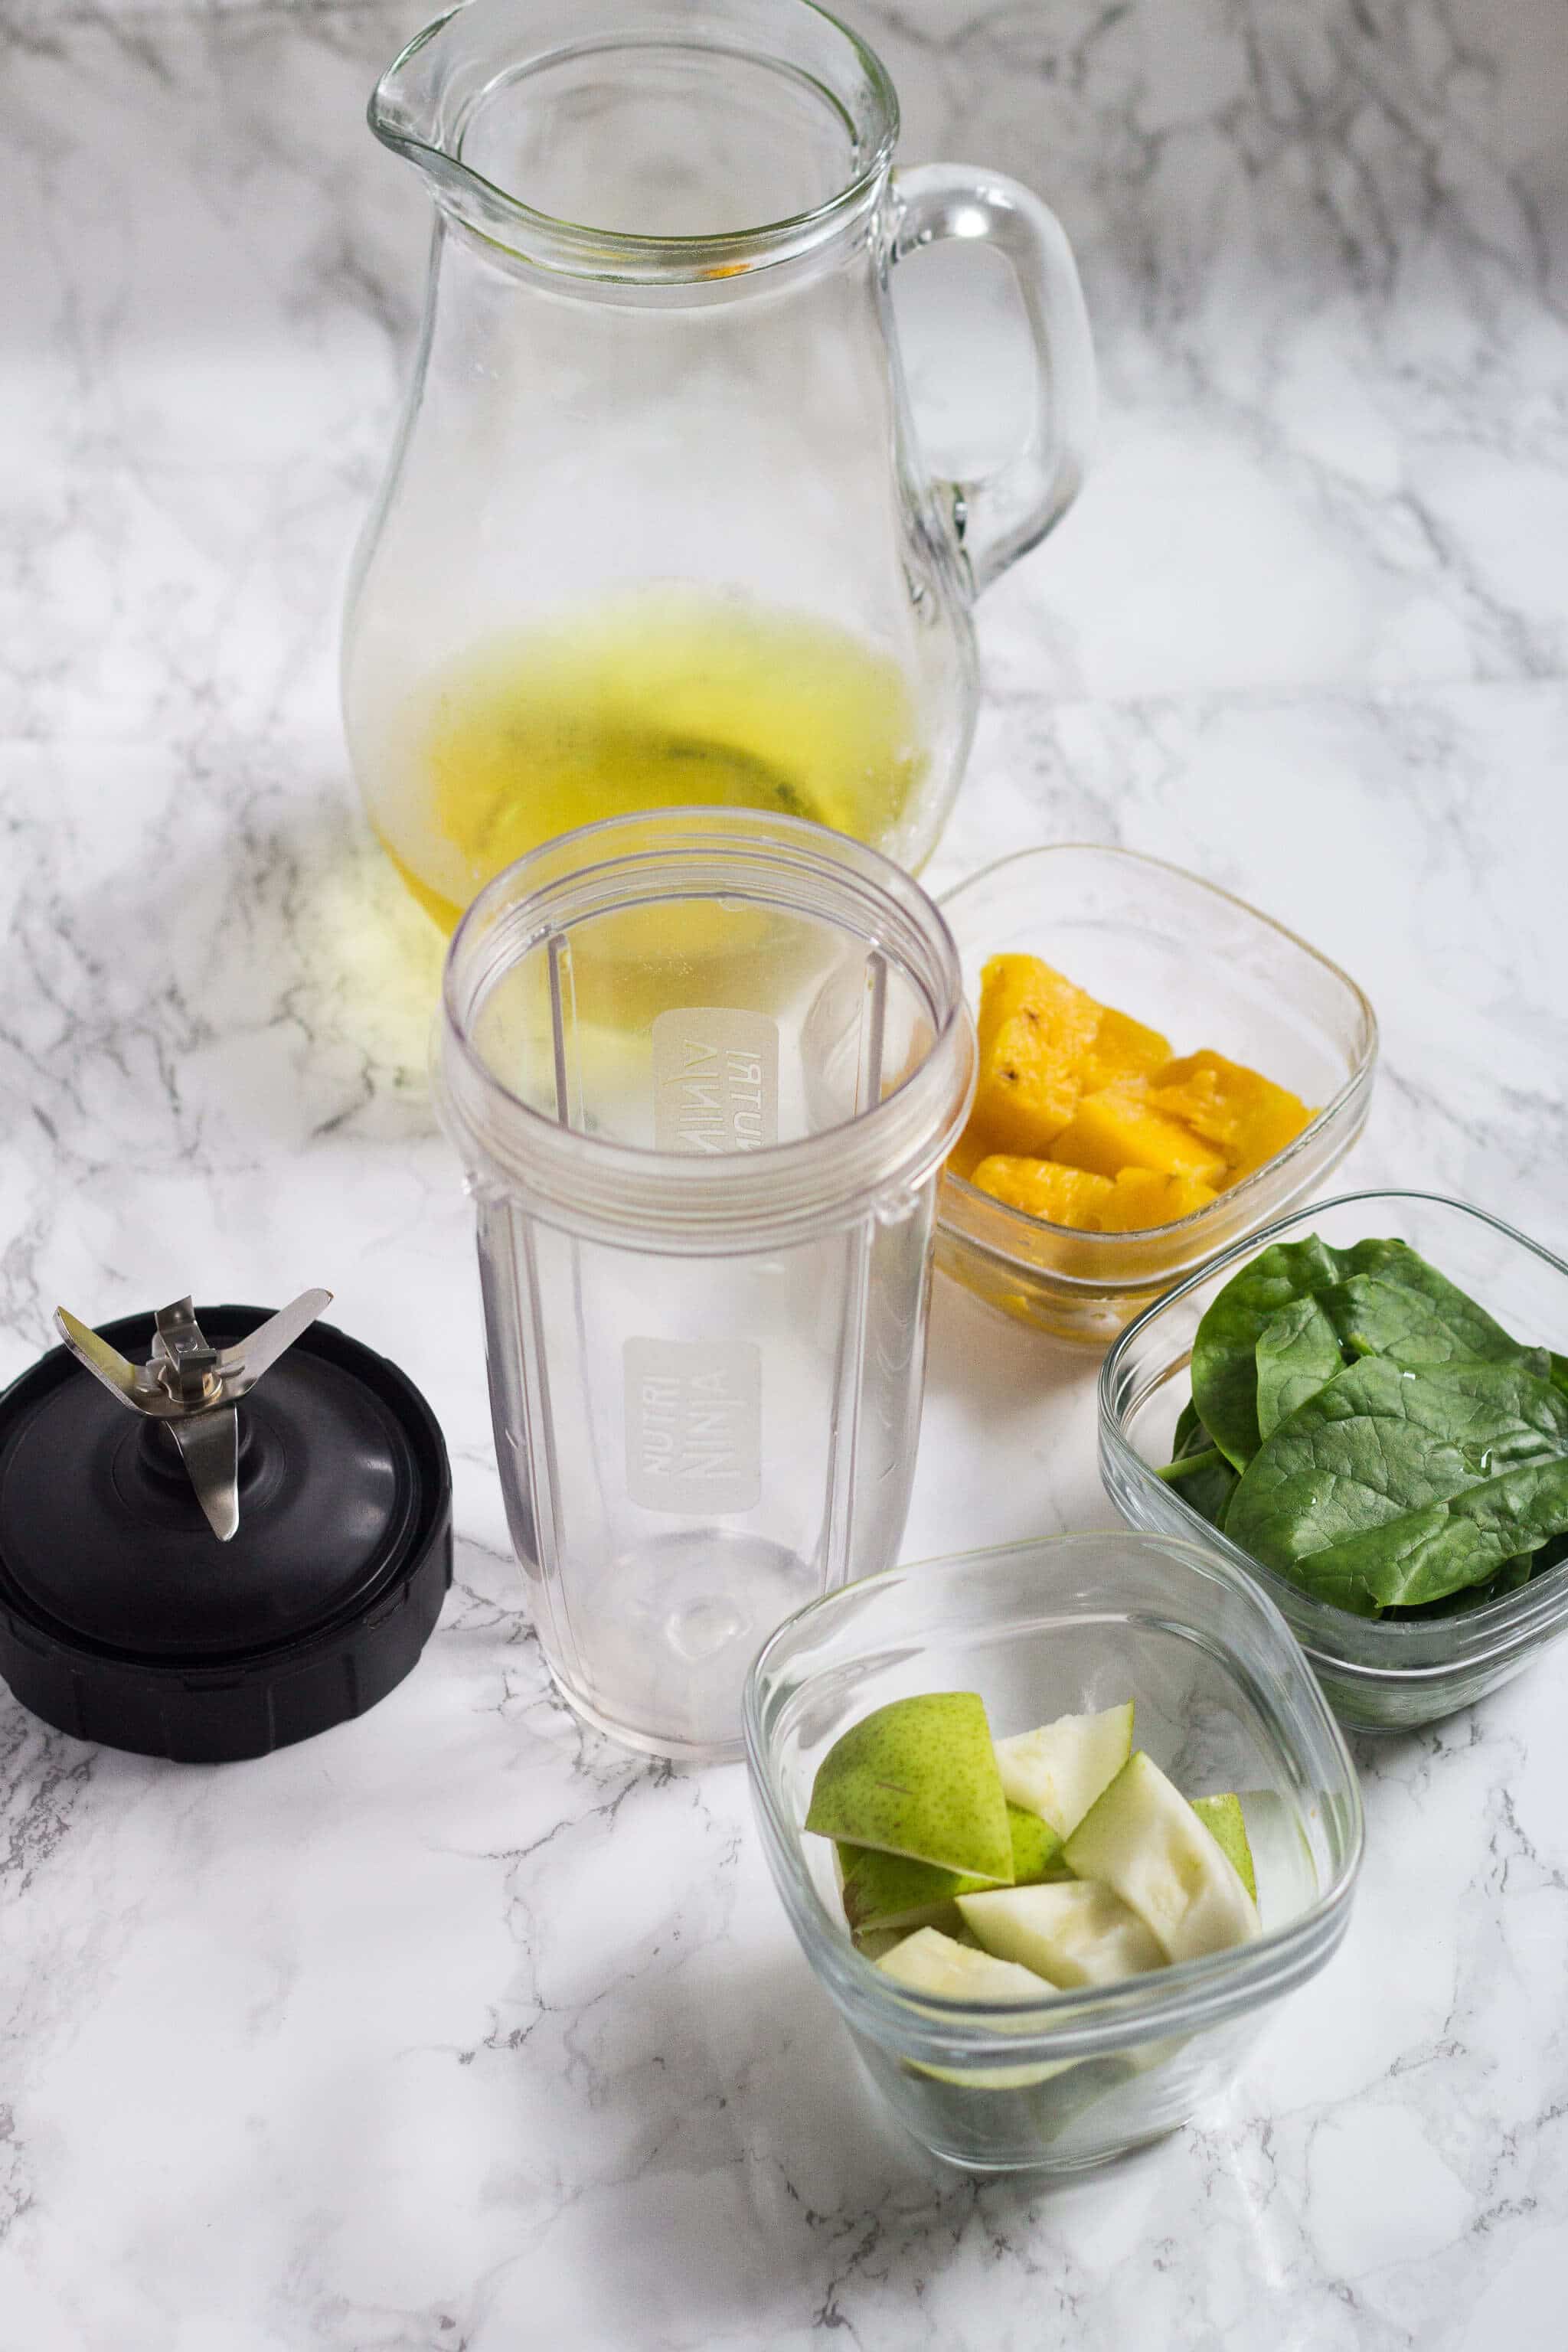 Green Tea Smoothie ingredients: cold brewed green tea, frozen pineapple, green pear, fresh spinach